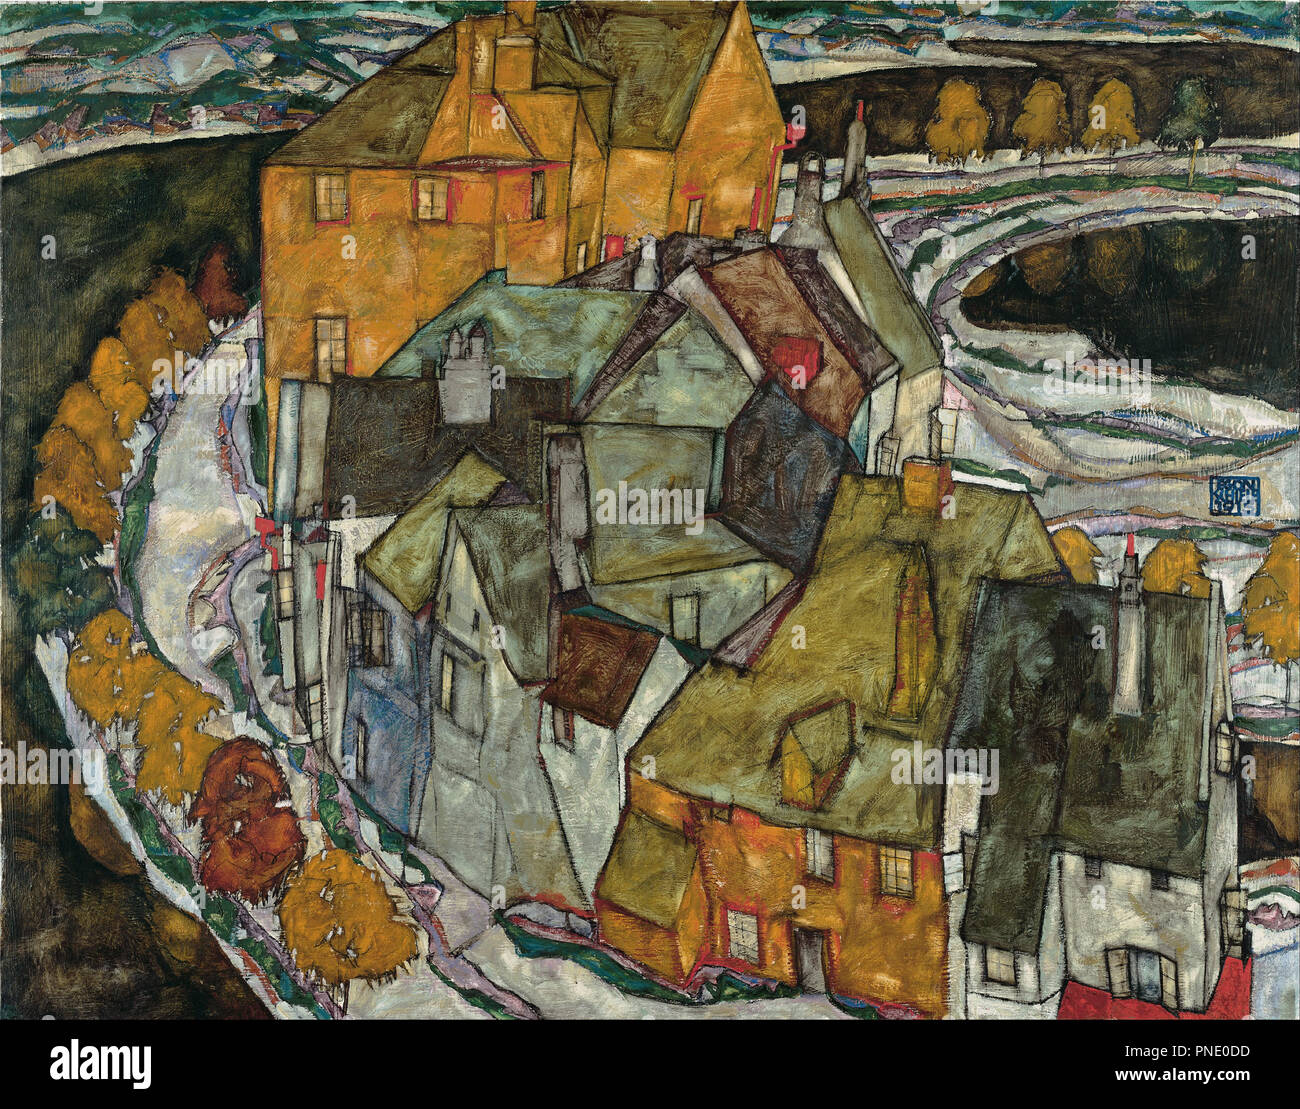 Der Häuserbogen II ("Inselstadt") Crescent of Houses II (Island Town). Date/Period: 1915. Painting. Oil on canvas. Height: 1,105 mm (43.50 in); Width: 1,405 mm (55.31 in). Author: EGON SCHIELE. SCHIELE, EGON. Stock Photo